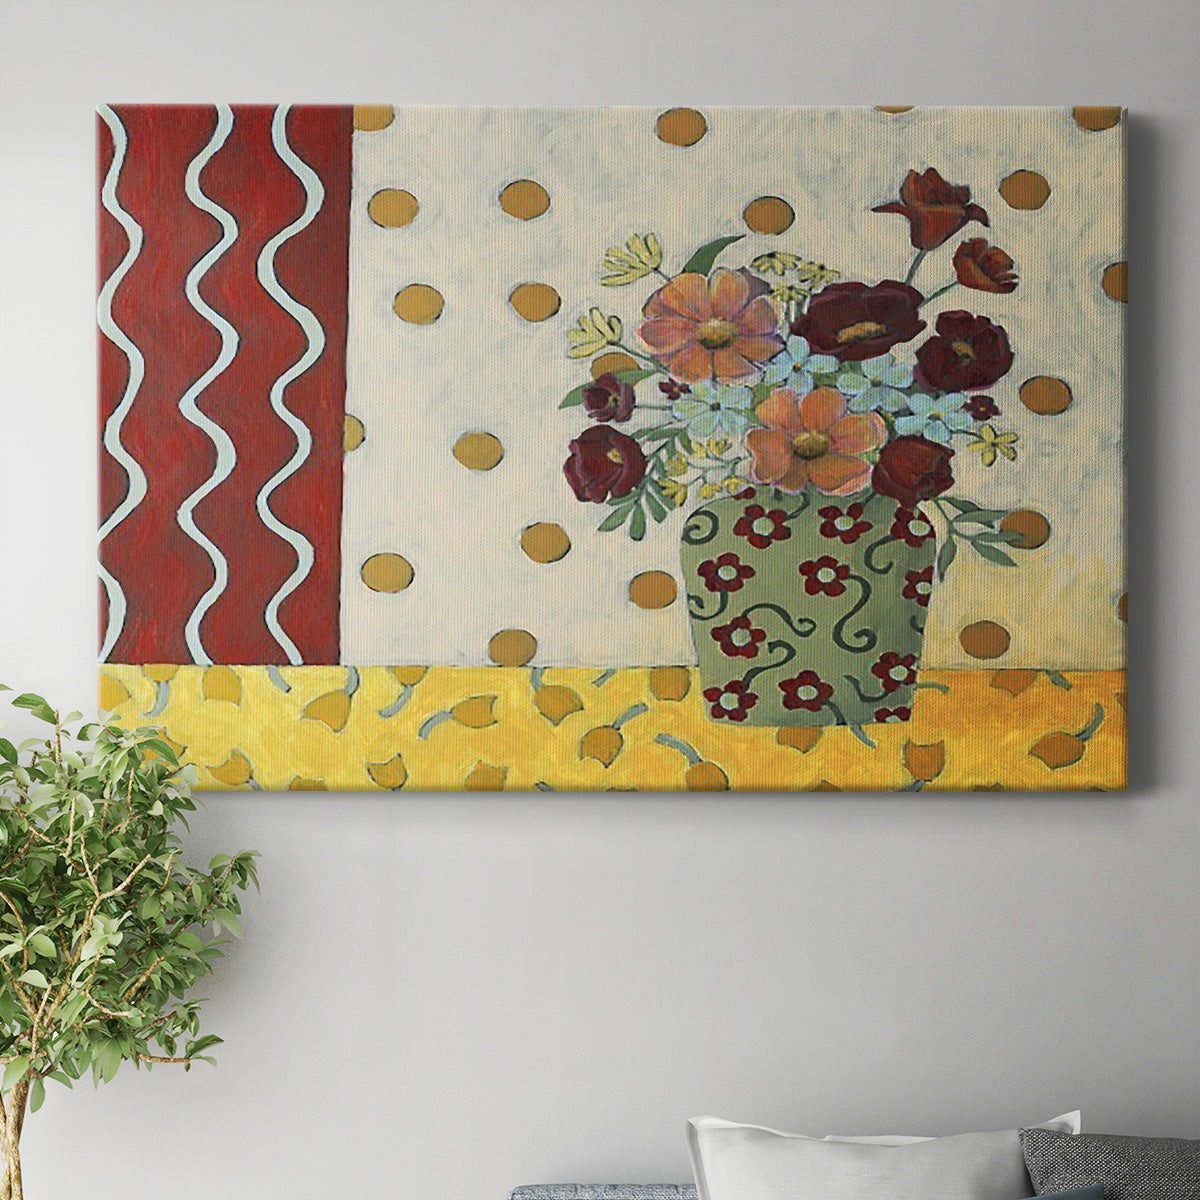 Flowerscape II Premium Gallery Wrapped Canvas - Ready to Hang